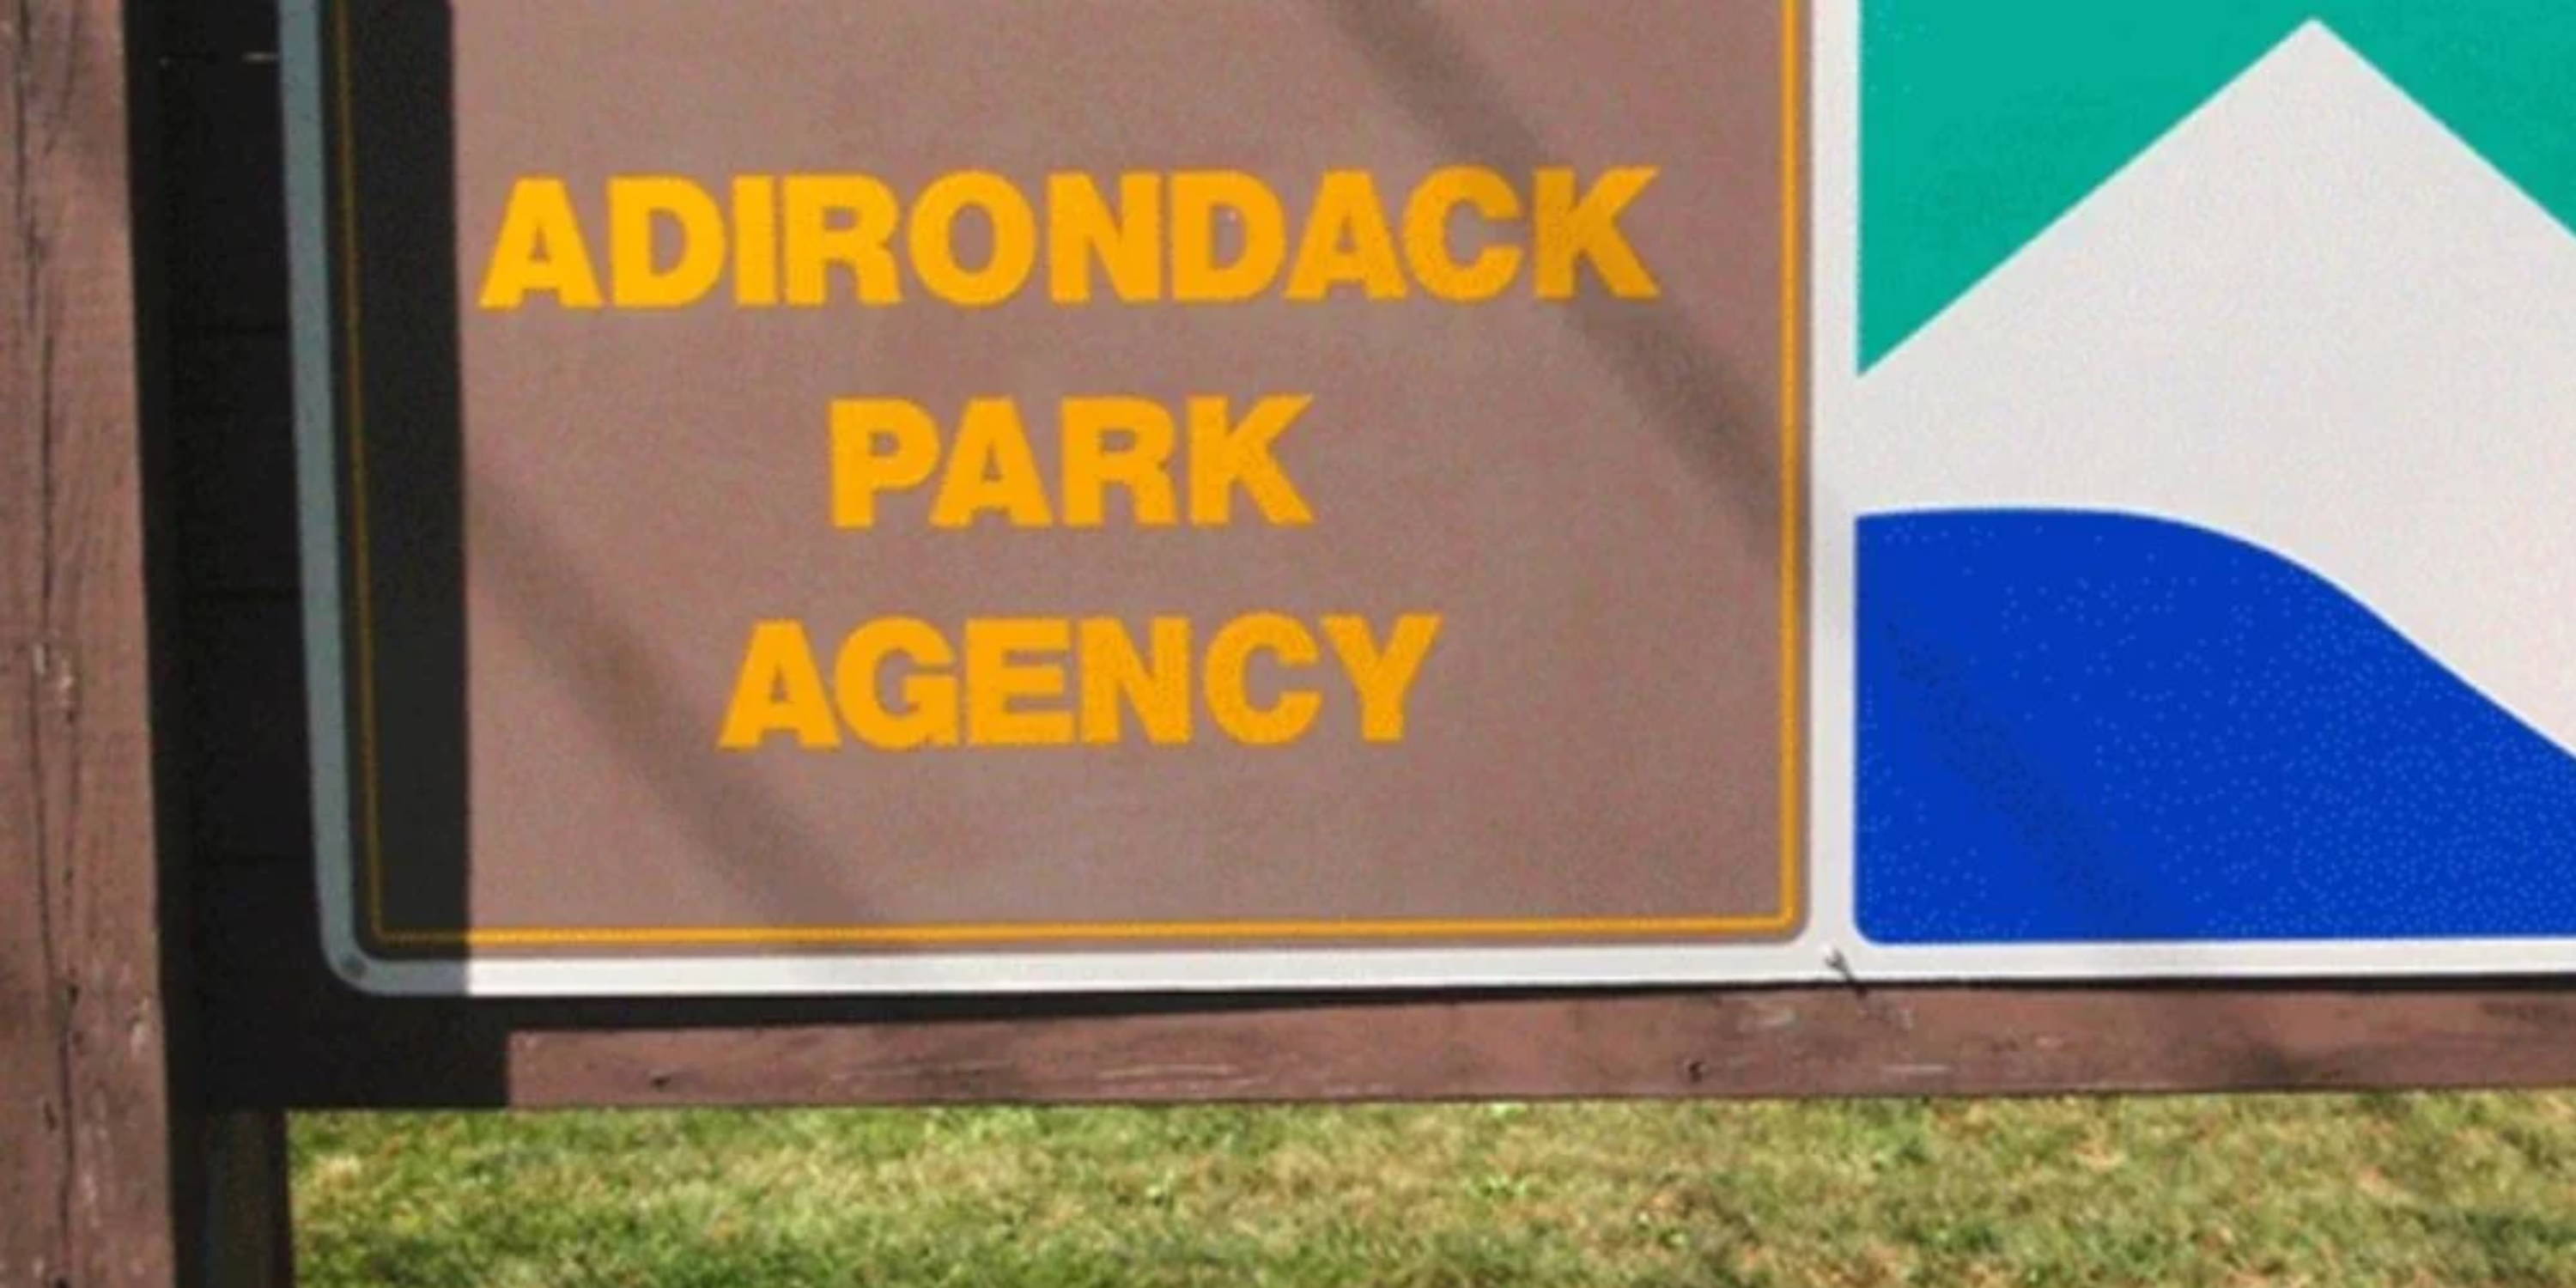 The Adirondack Park Agency Sign